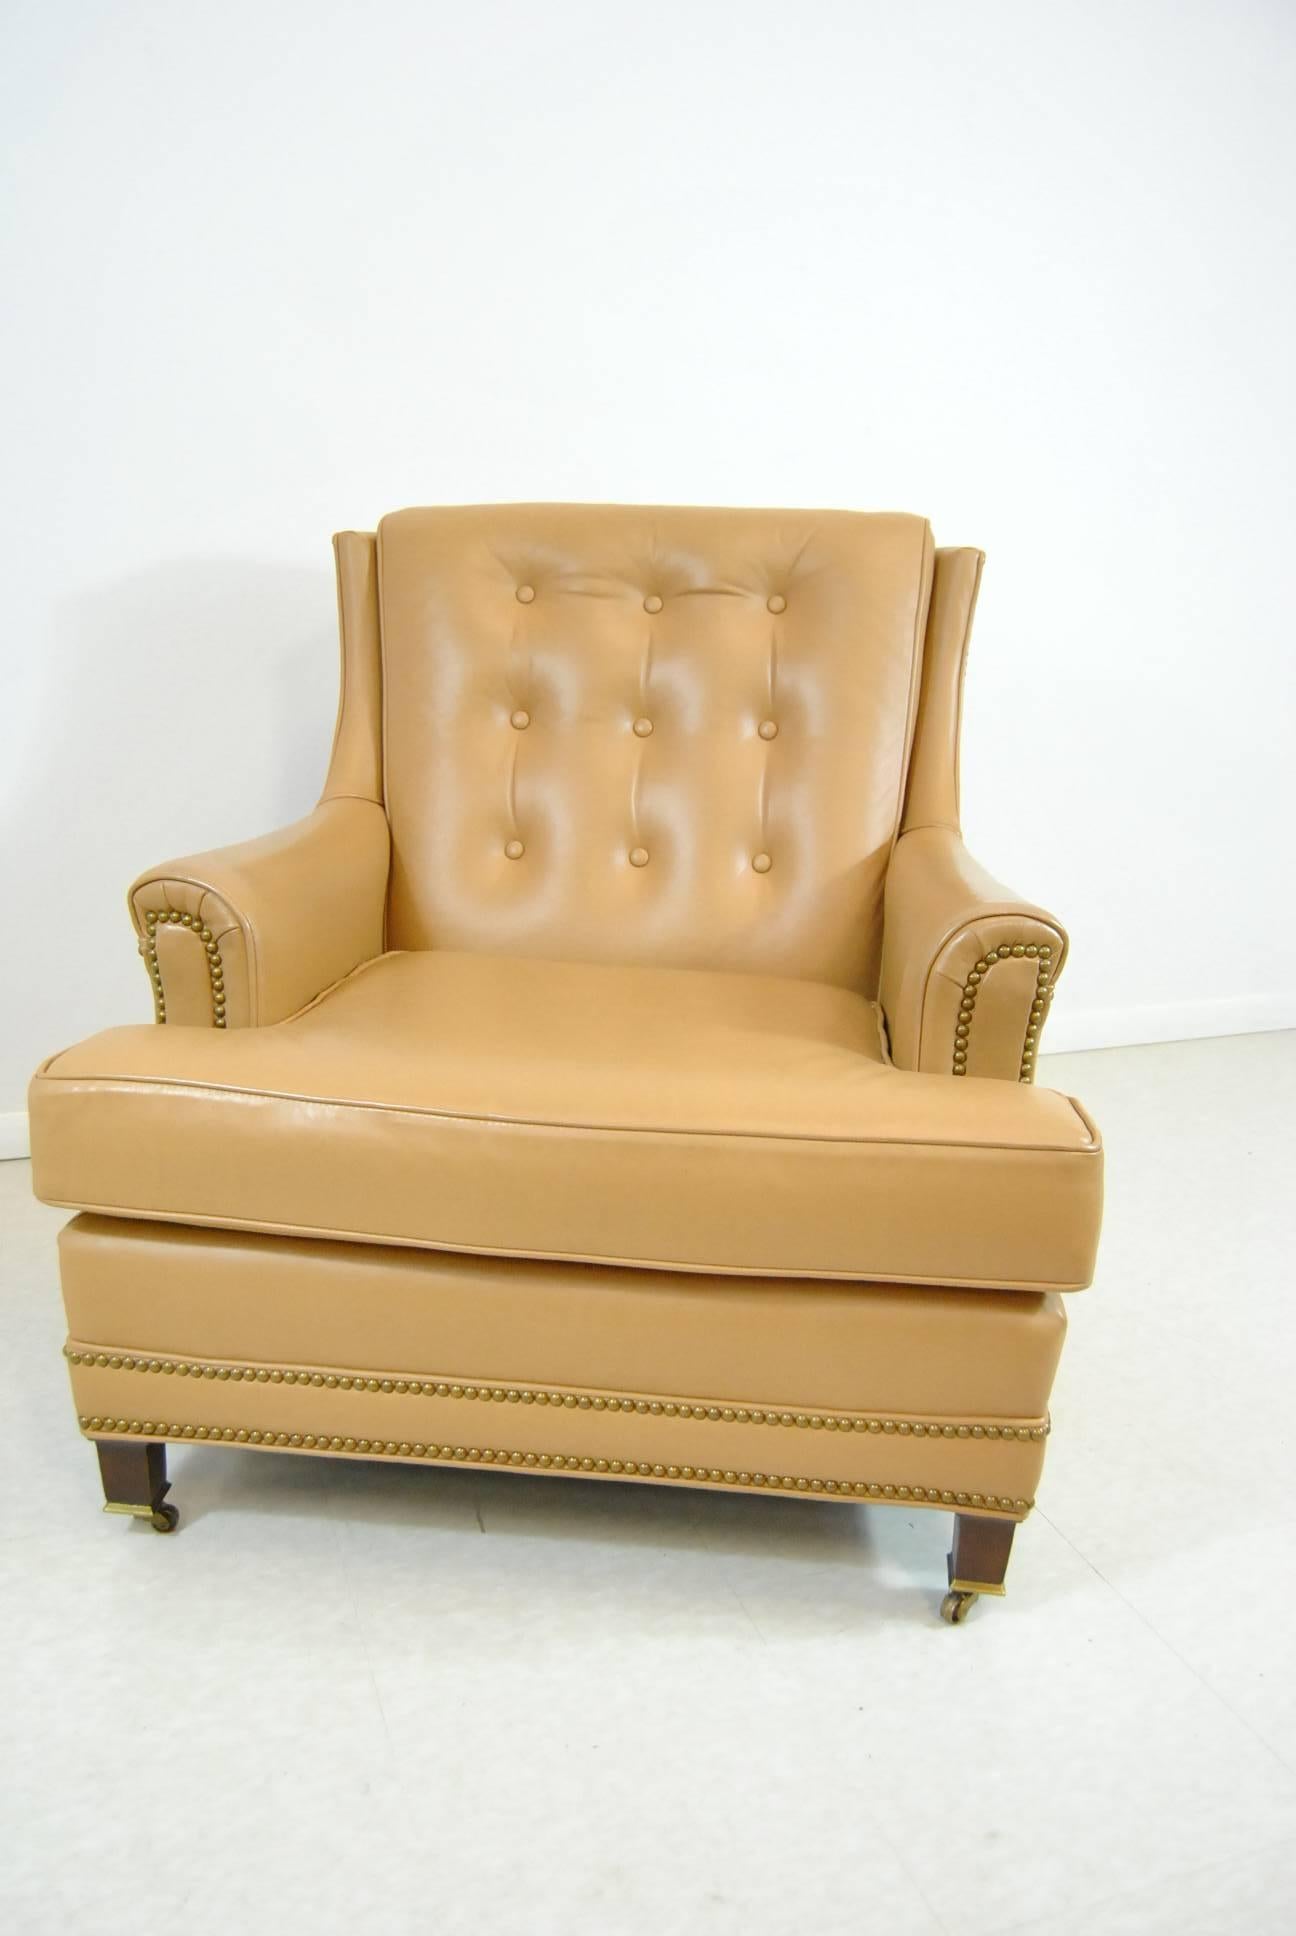 A stunning tan leather club chair and ottoman by Hanock and Moore. Nailhead trim and front casters add to the beauty of this set. This chair and ottoman set will provide you with a Classic and casual style for your home. Very good condition with